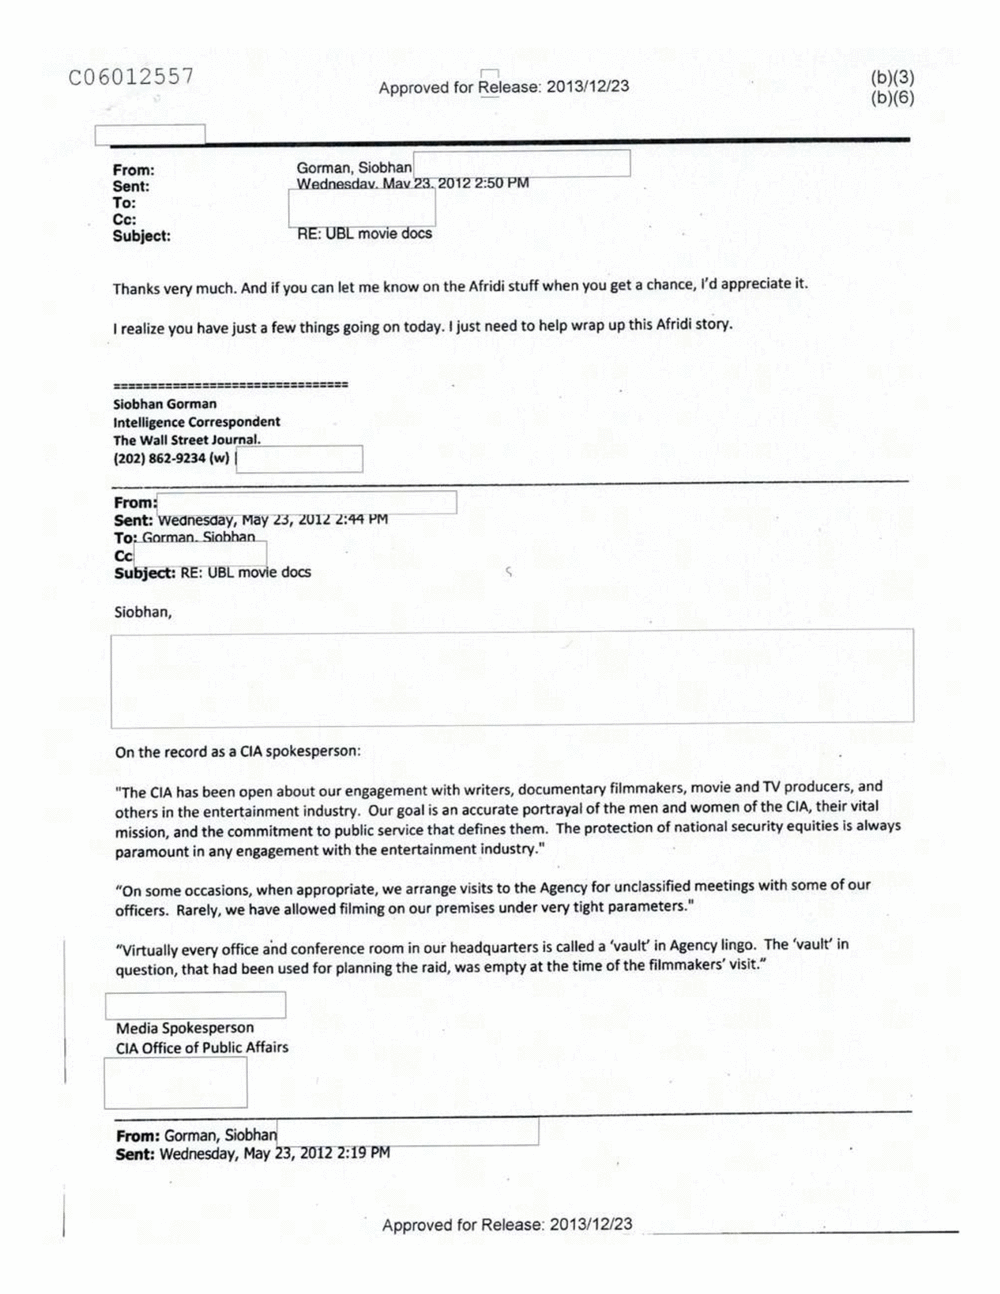 Page 158 from Email Correspondence Between Reporters and CIA Flacks